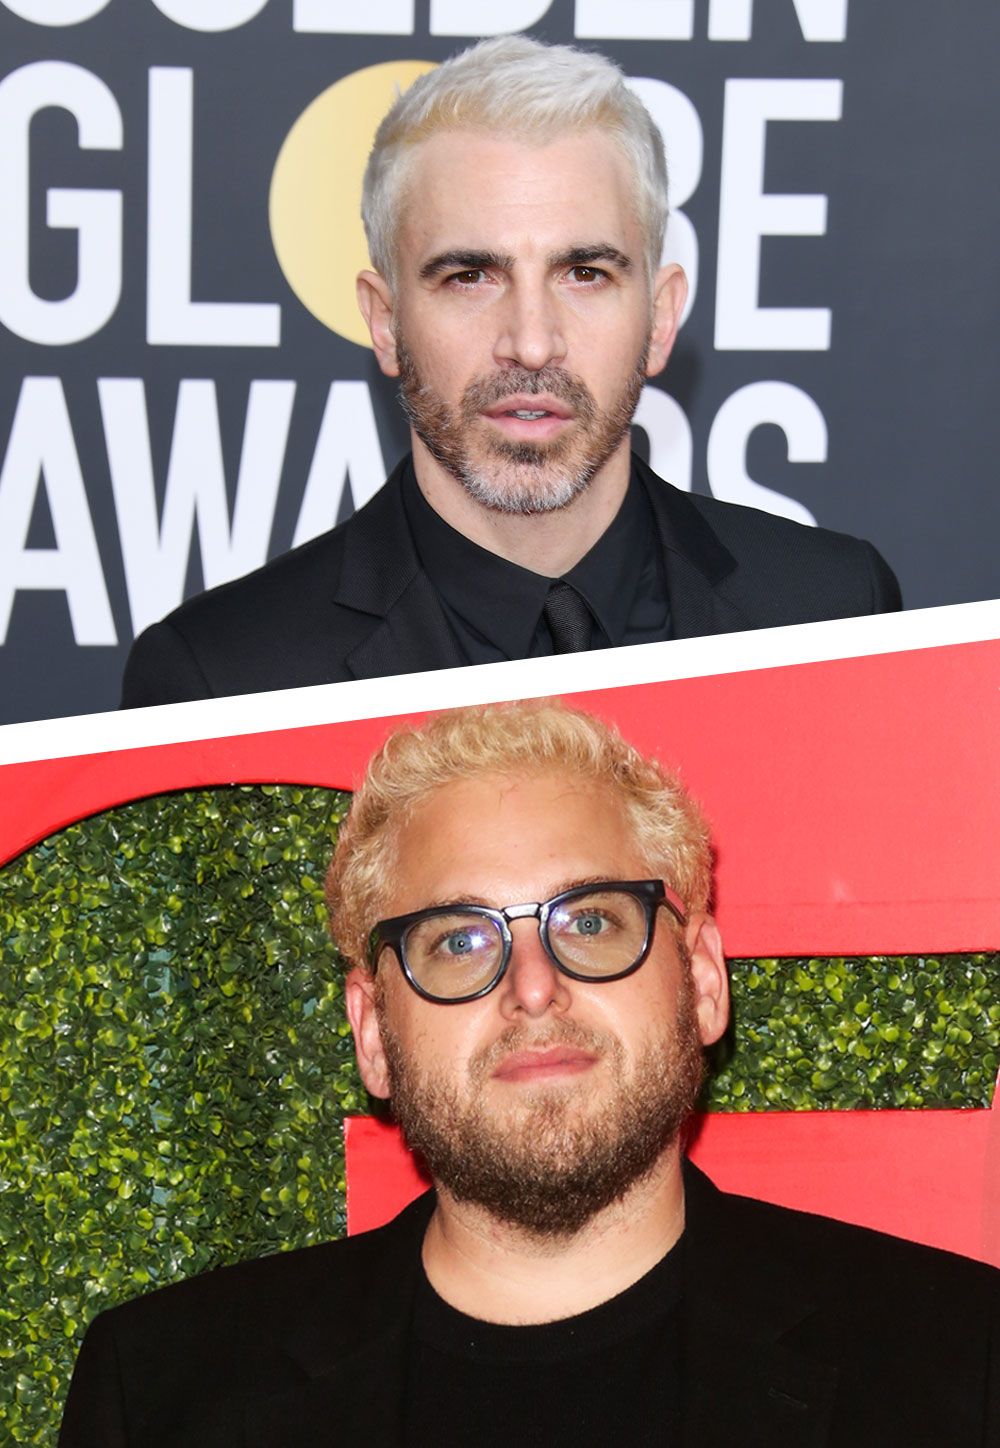 6 Bleached Blond Hair Do's and Don'ts For Men - How to Go Platinum